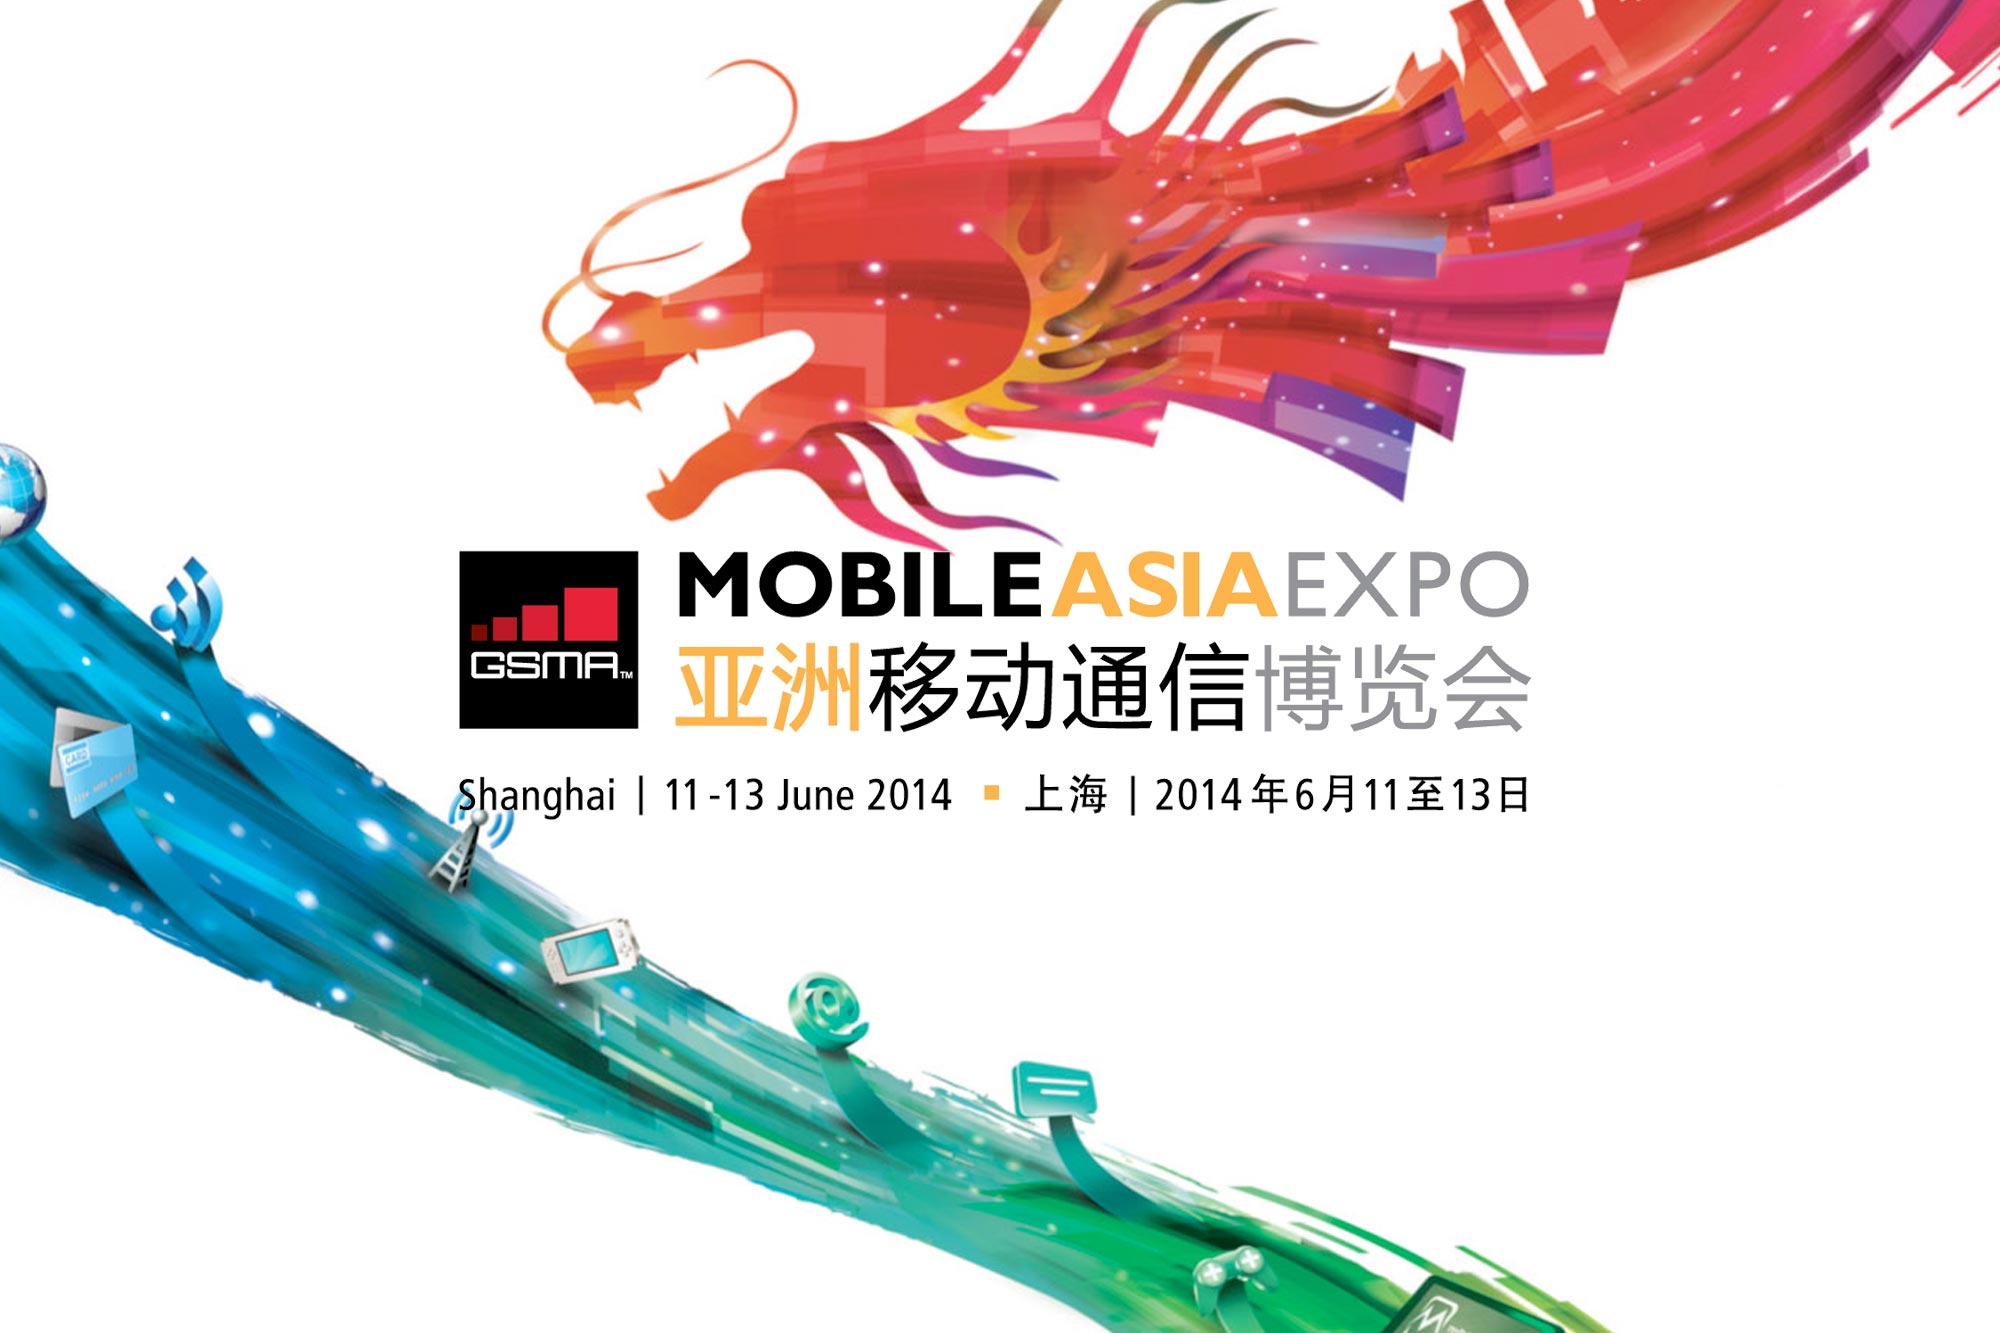 MobiWeb at MAE 2014, Asia's most exciting mobile event